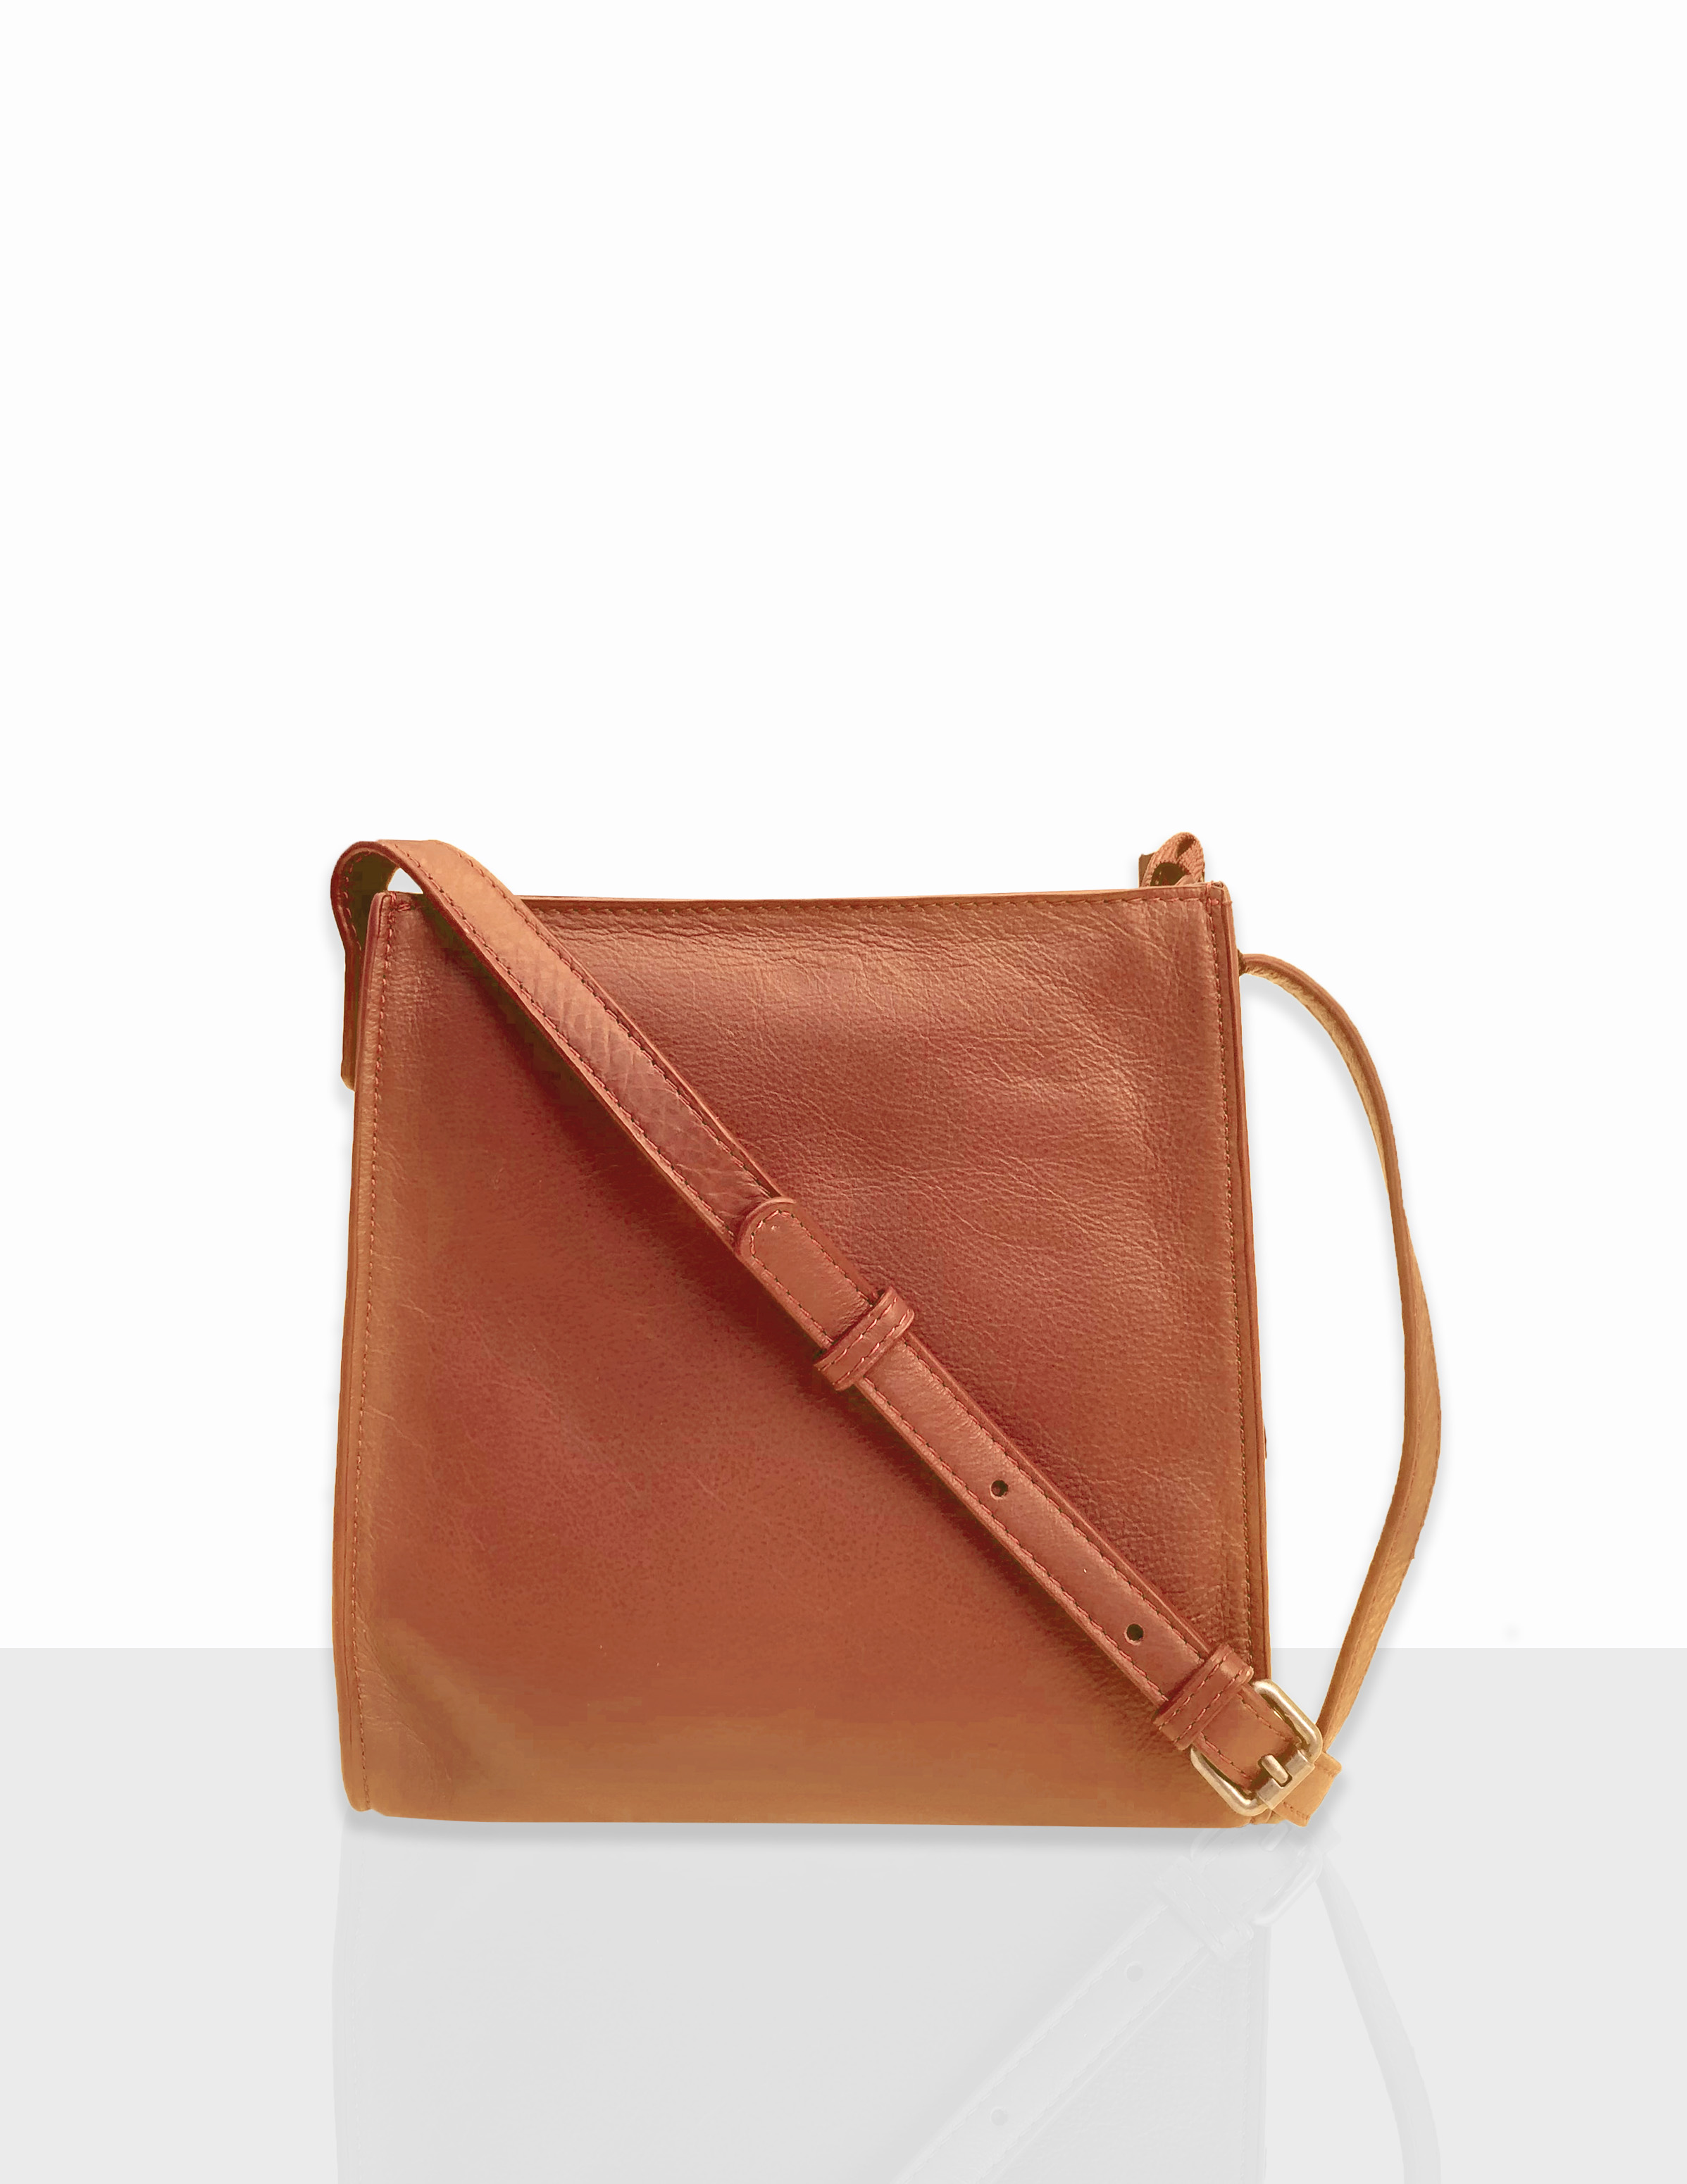 JOLIE LEATHER ORANGE SQUARE SLING BAG | Rosella - Style inspired by ...